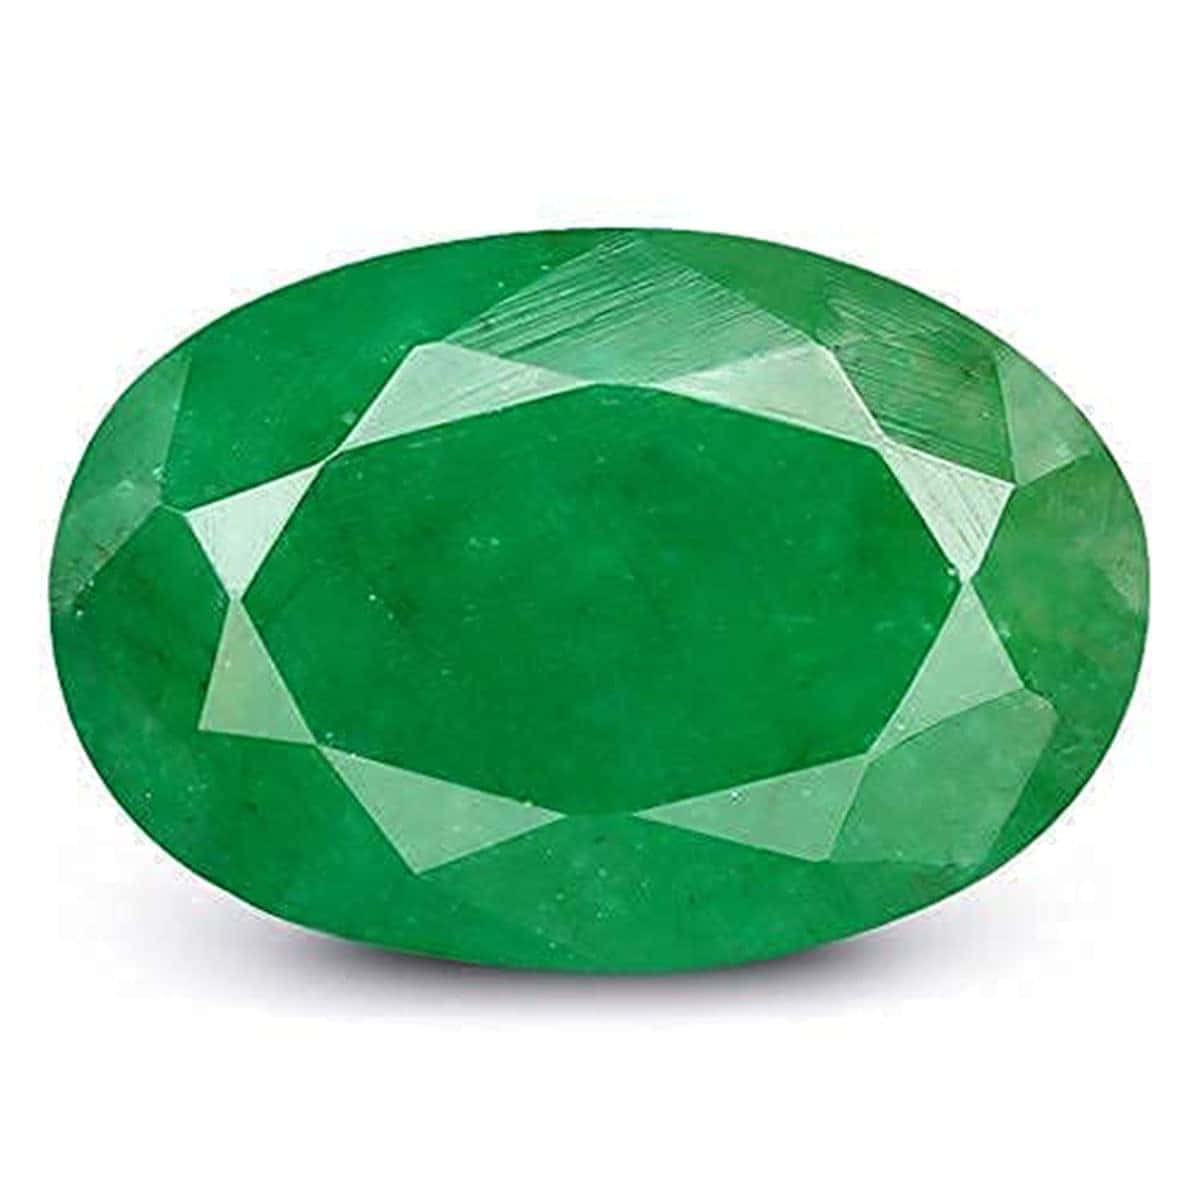 An Oval Emerald Stone